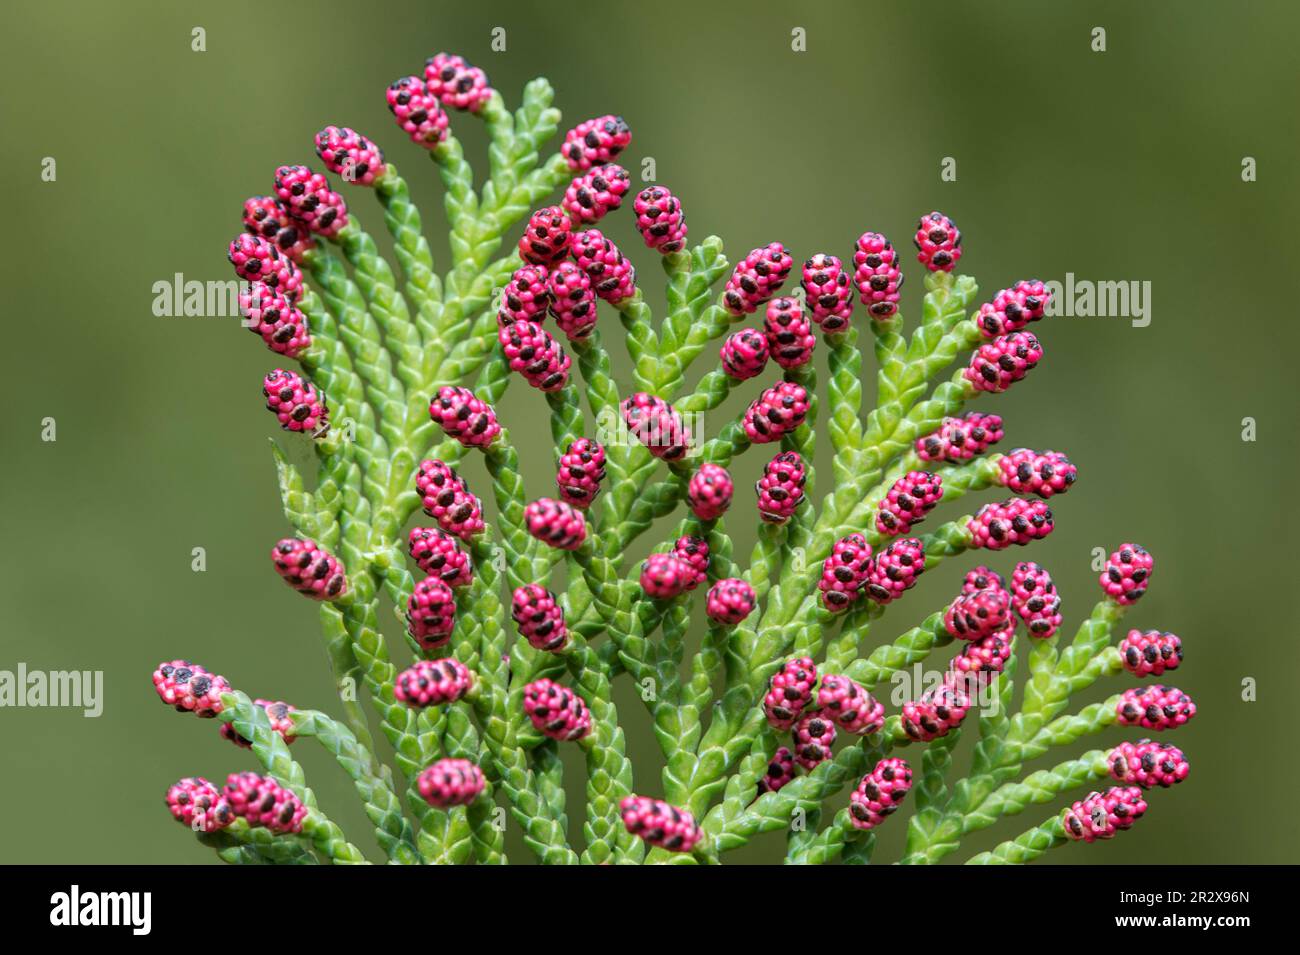 Red male flowers of the Lawson Cypress (Chamaecyparis lawsoniana) native to California Stock Photo